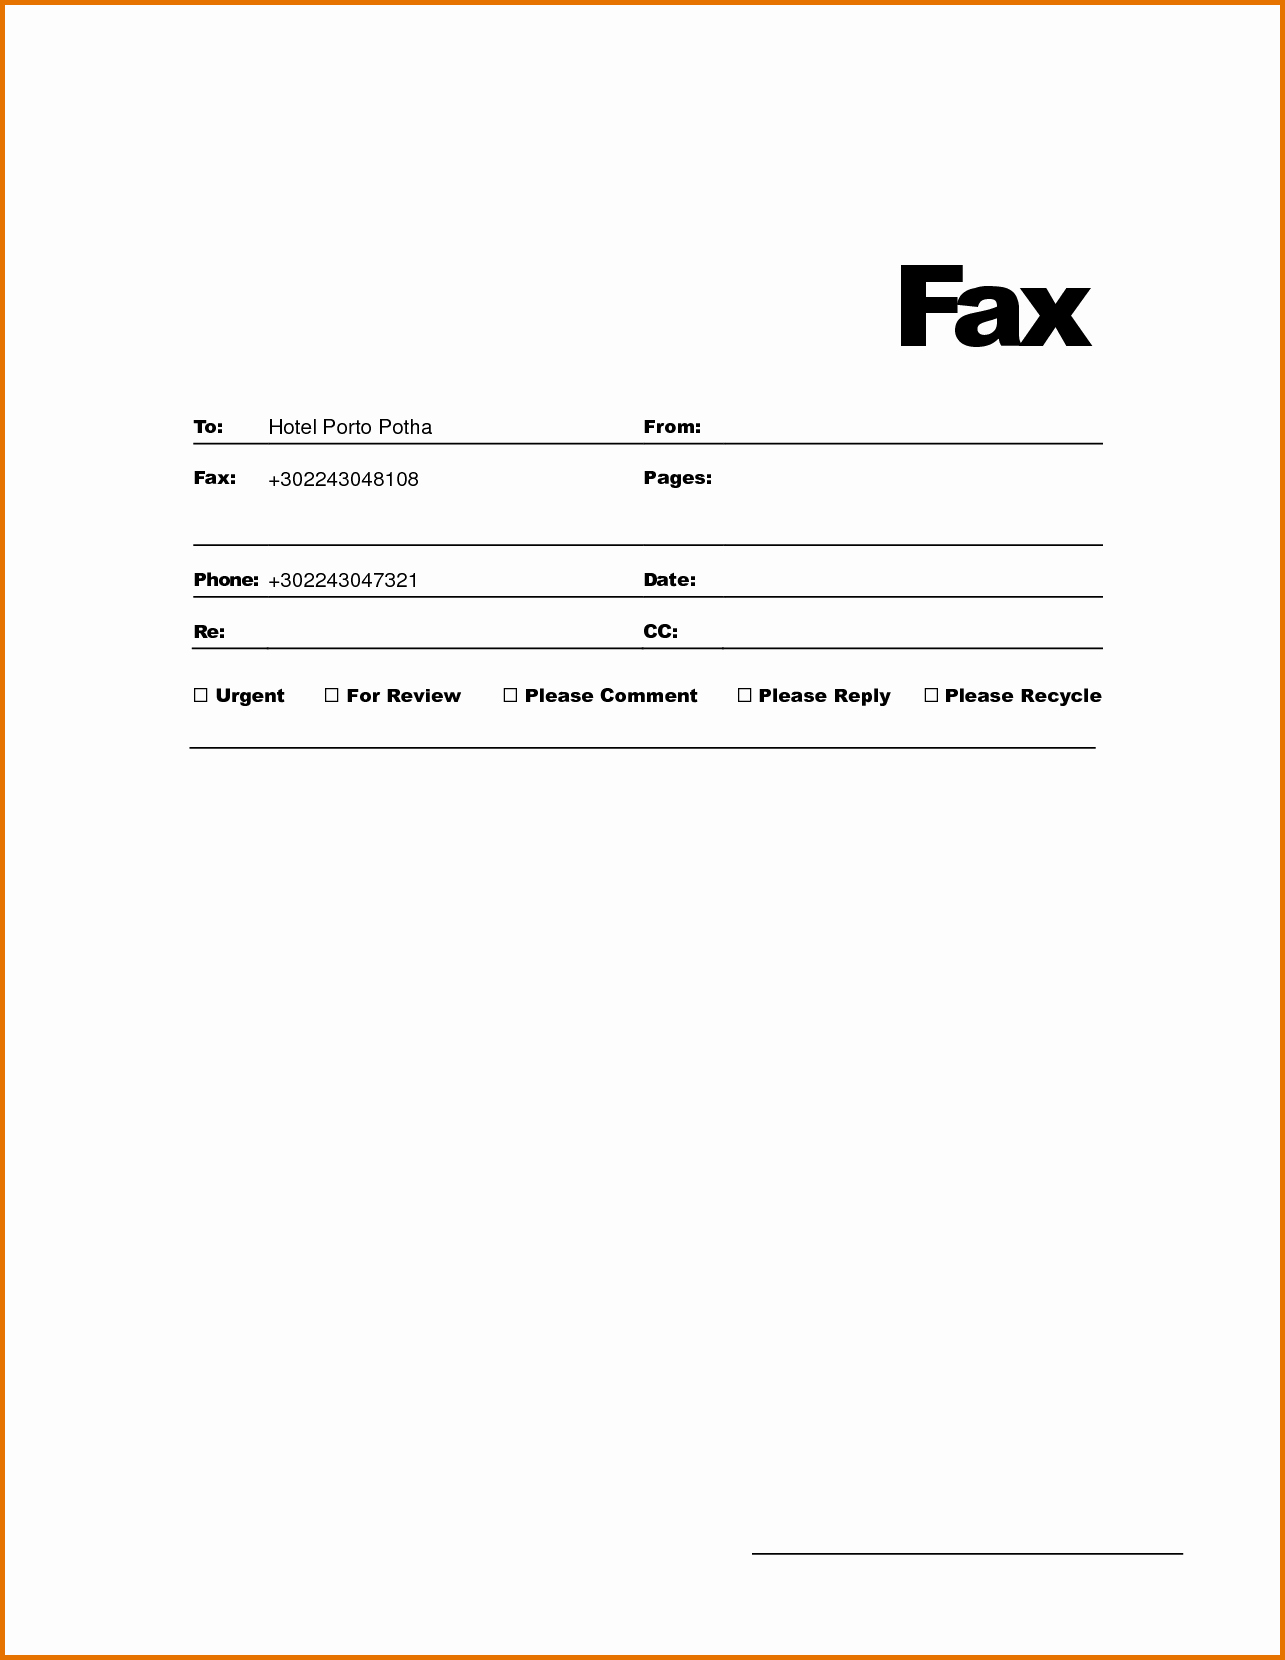 Fax Cover Sheet Template Microsoft Luxury Fax Cover Sheet Template for Wordreference Letters Words